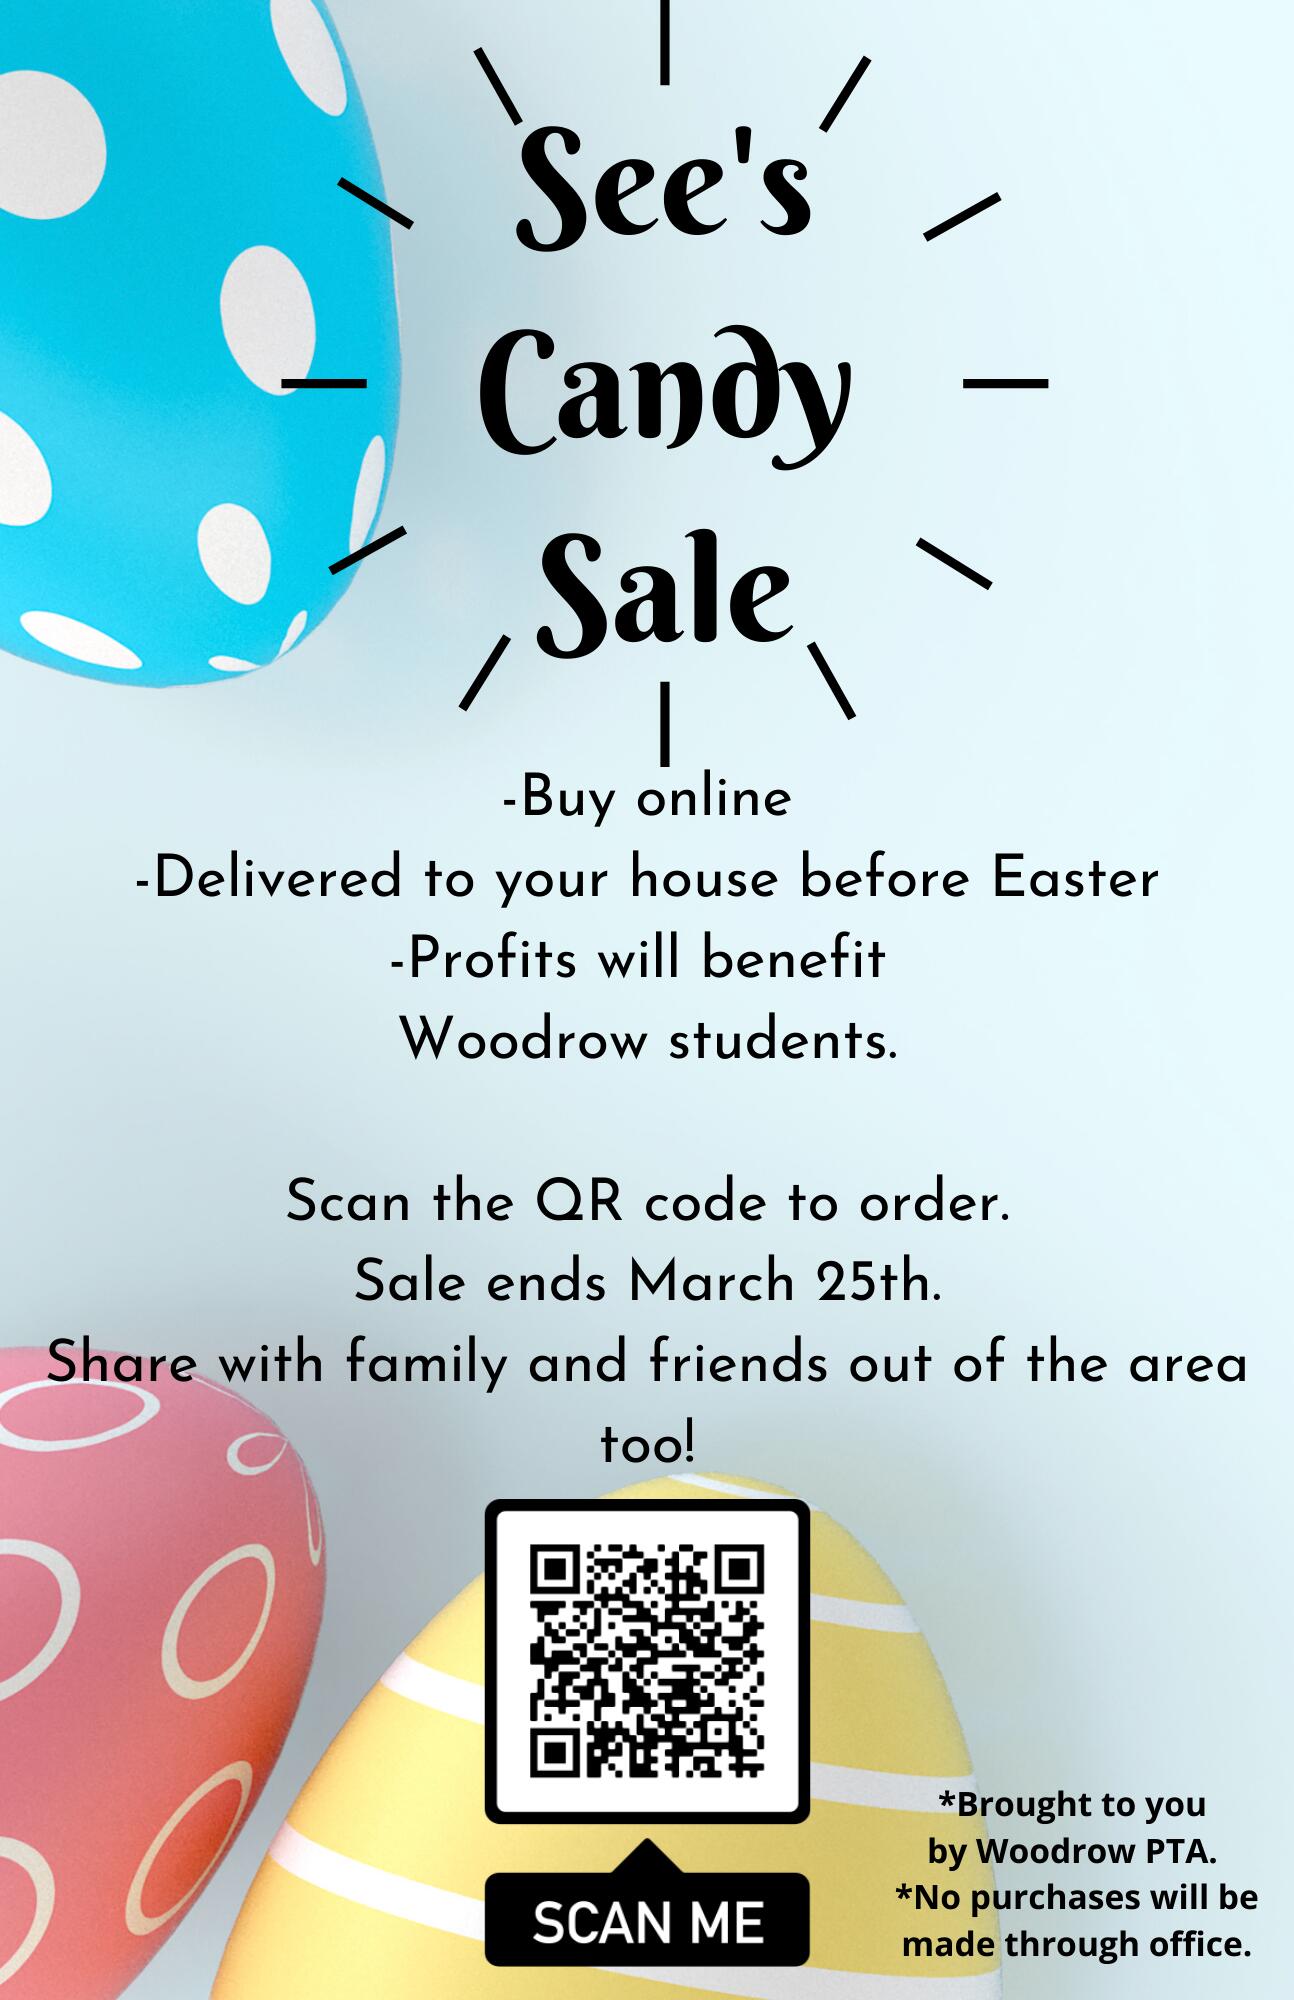 See's Candy Sale